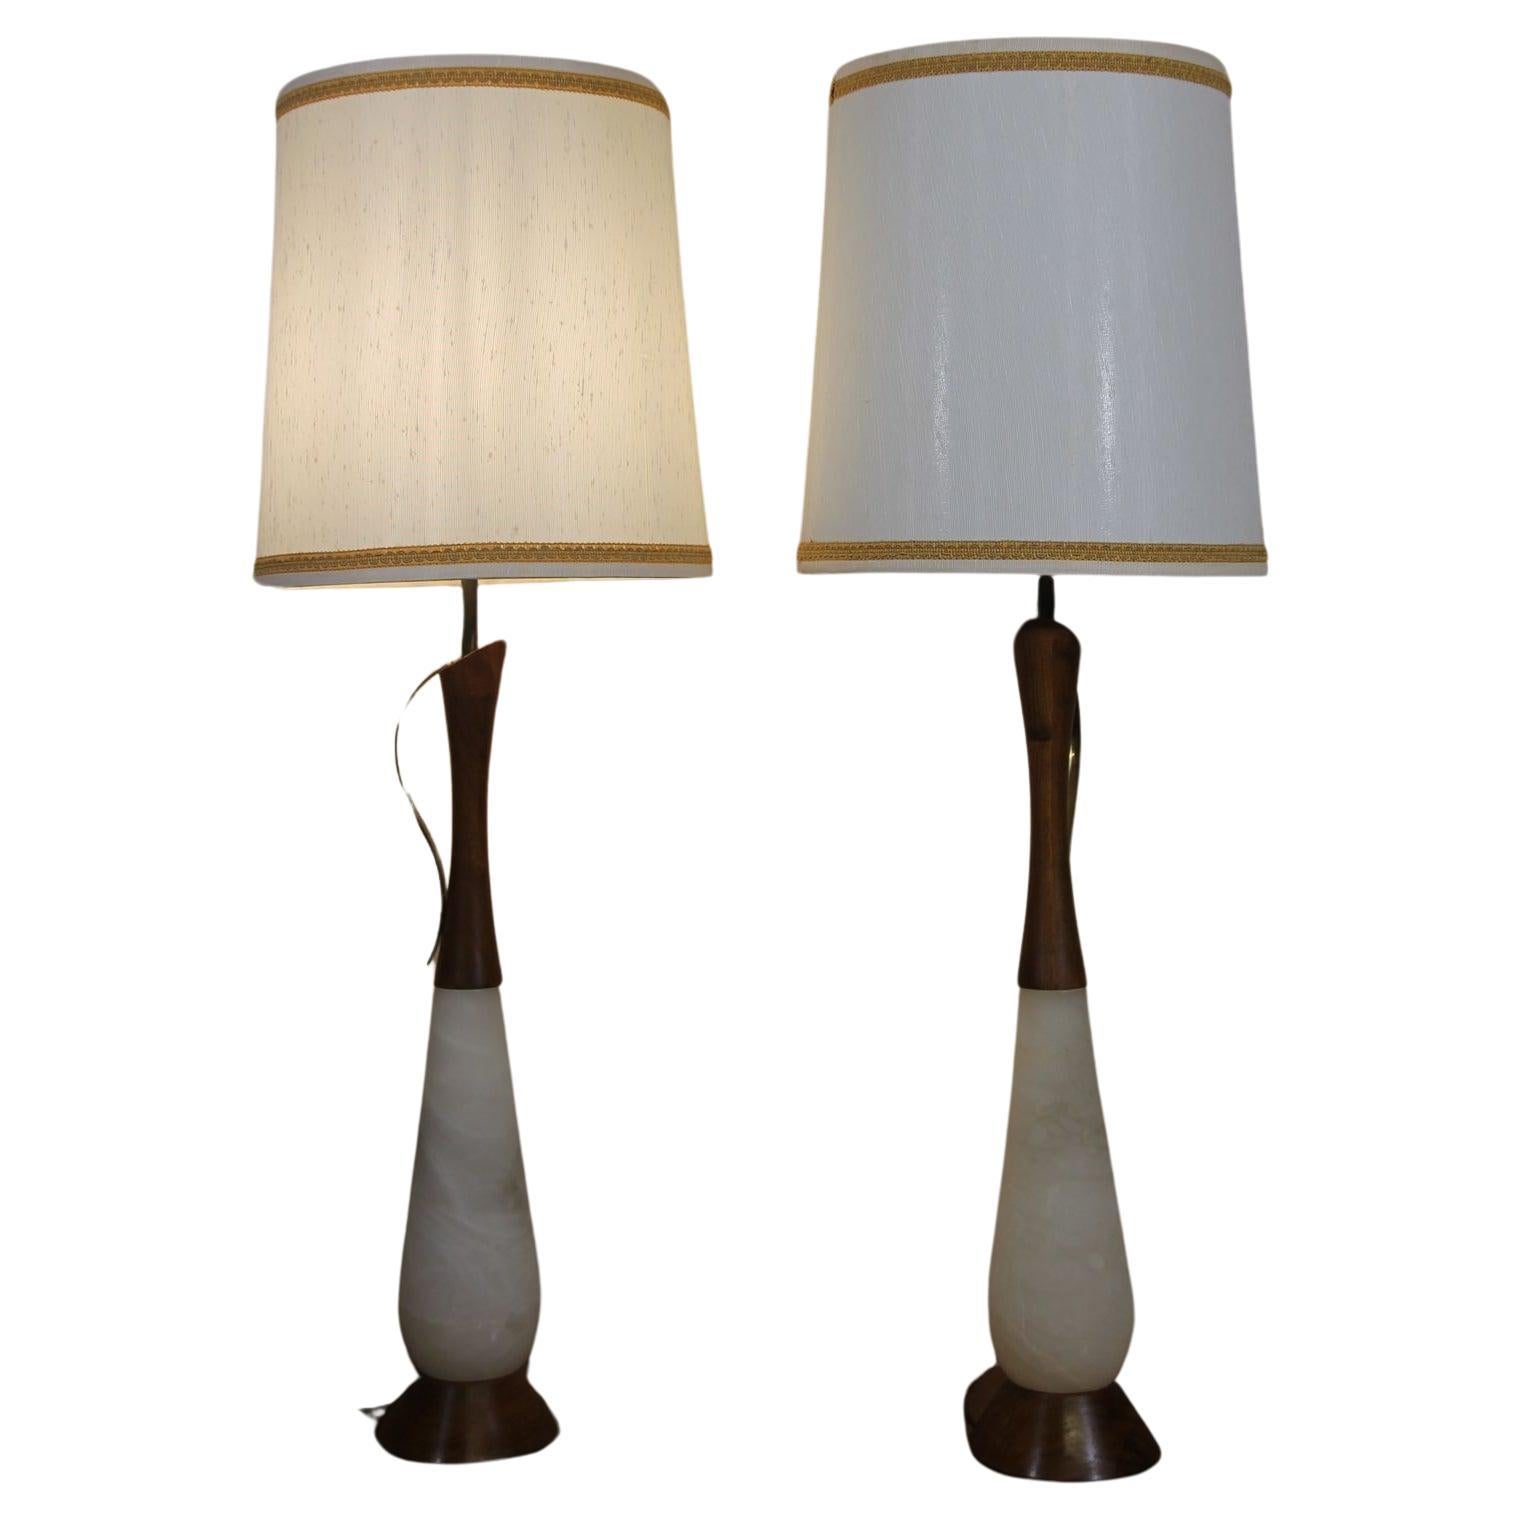 Italian Alabaster Lamps With Original Shades and Finials For Sale